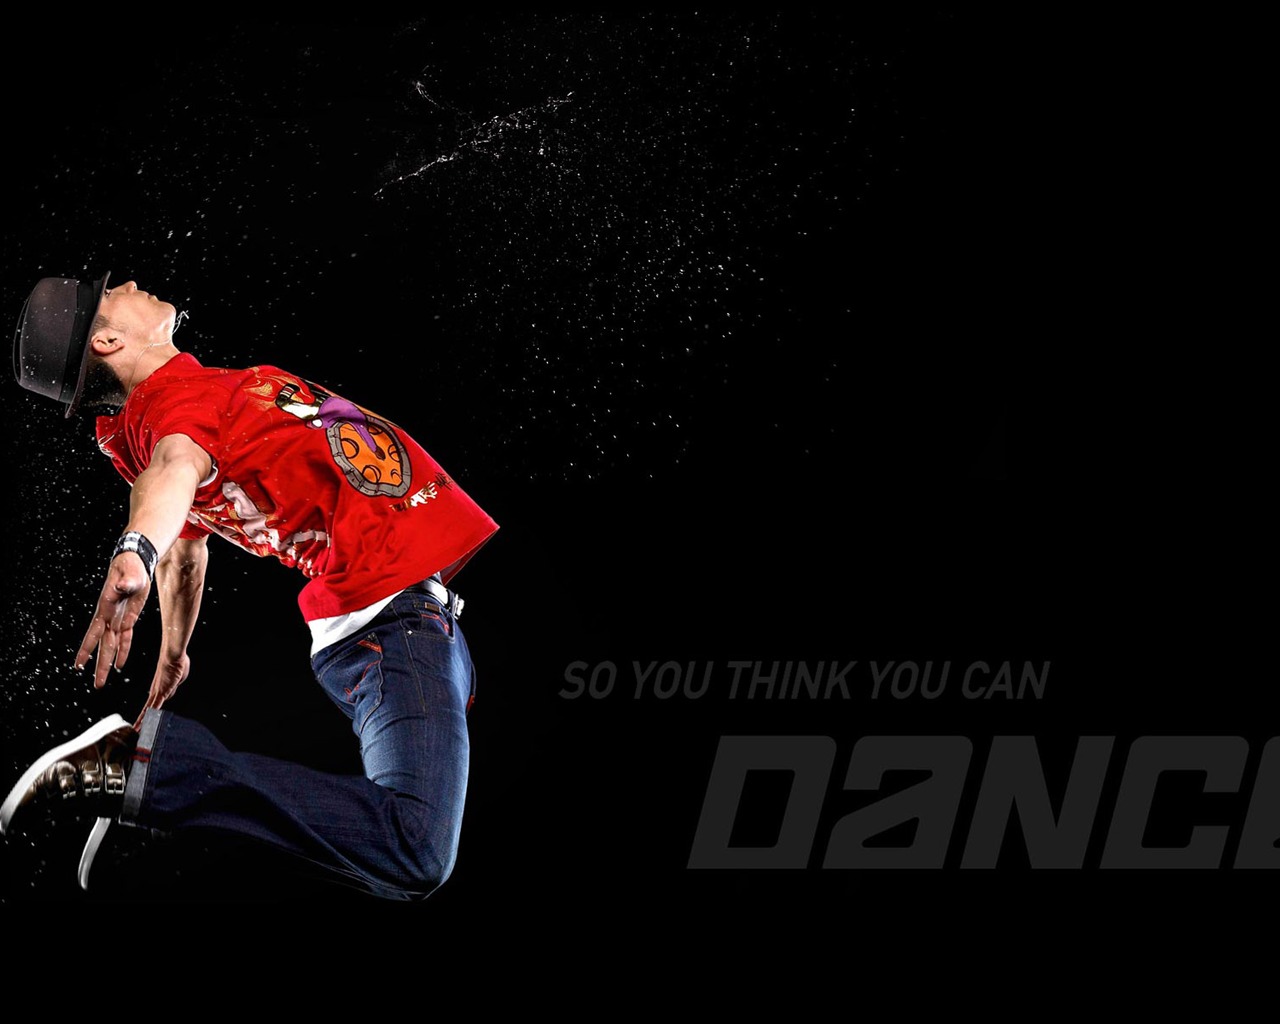 So You Think You Can Dance wallpaper (1) #6 - 1280x1024